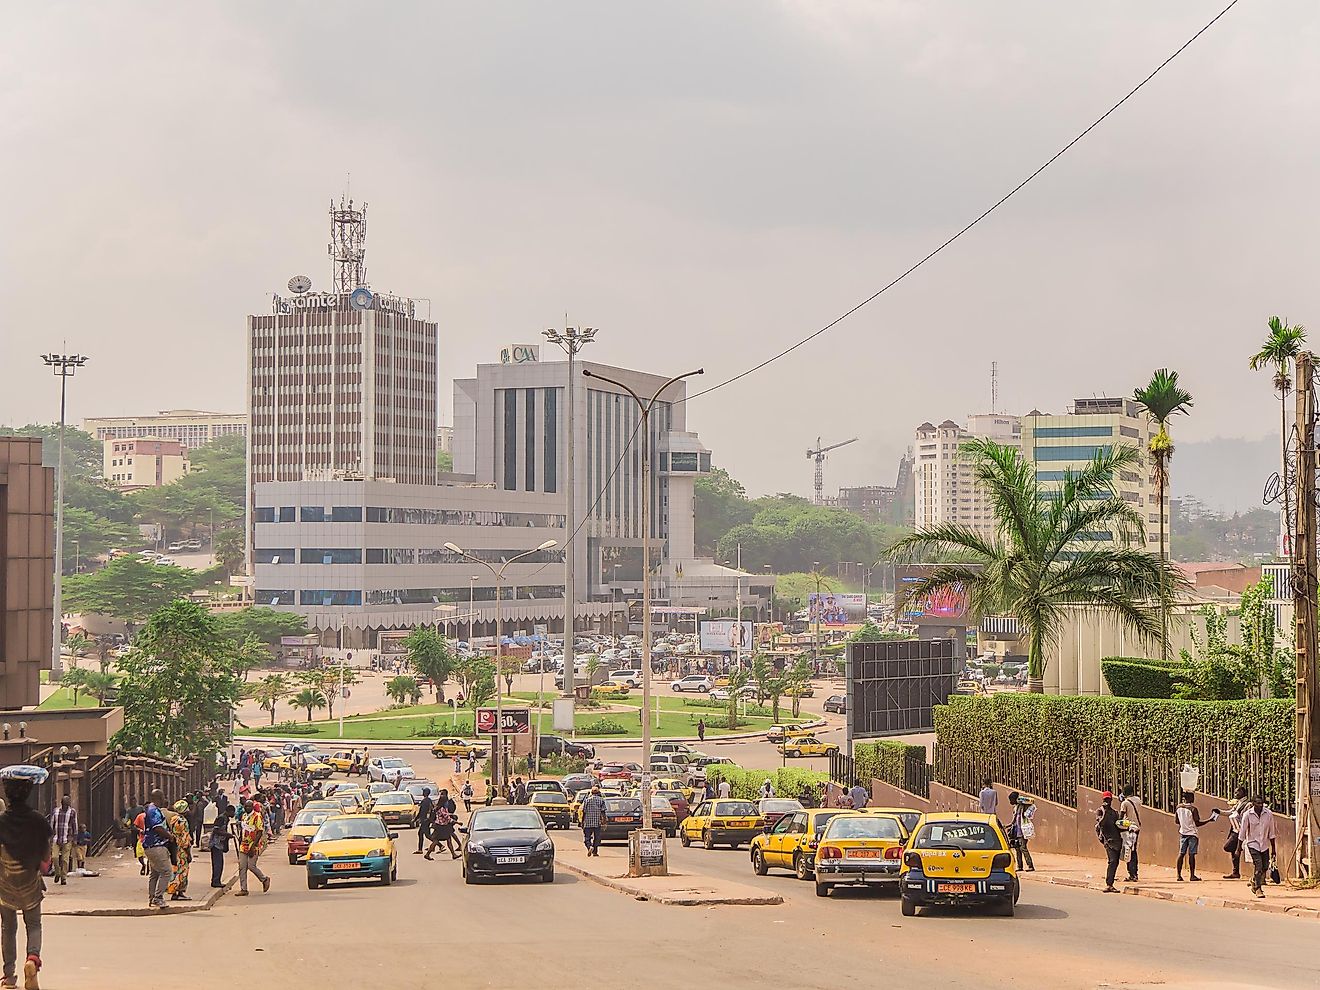 Yaounde is the capital of Cameroon and the second-largest city in the country, right after Douala. Image  credit: cyrilleyonnta / Shutterstock.com